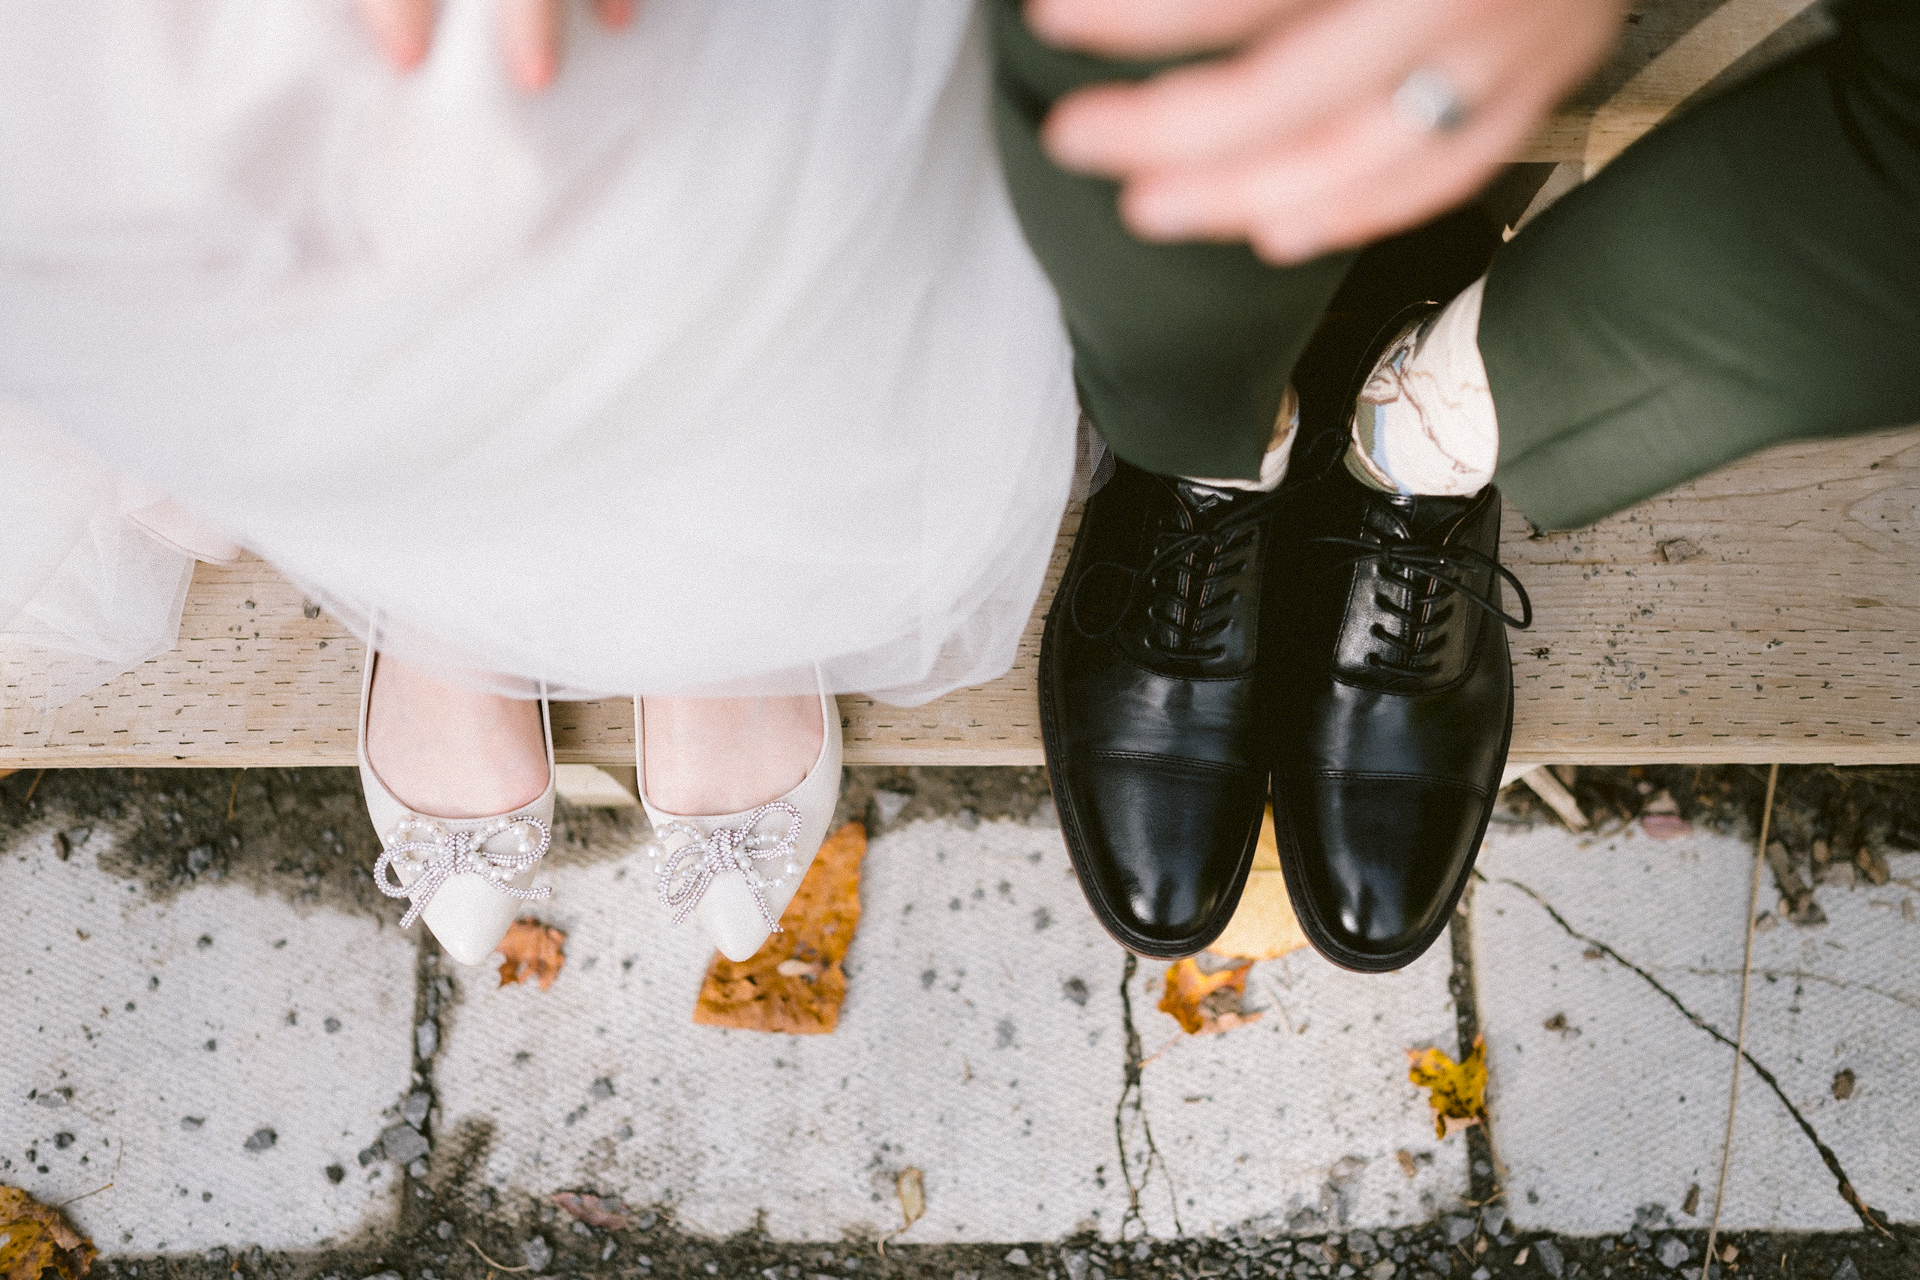 A bride and groom standing close together, showcasing their wedding attire and shoes.